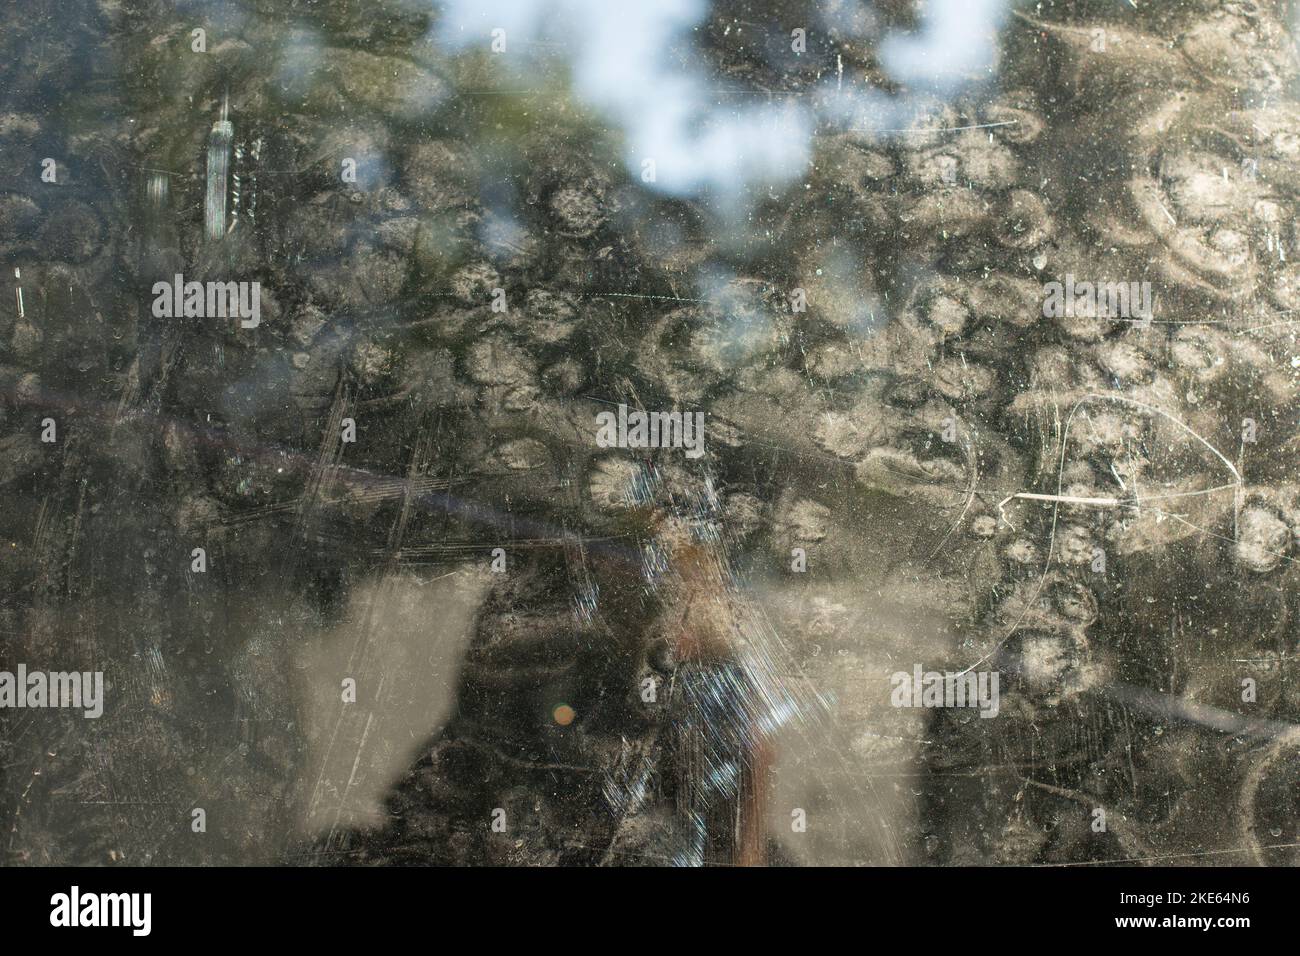 Dirty mirror on street. Reflection in turbid glass. Prints on surface. Stock Photo